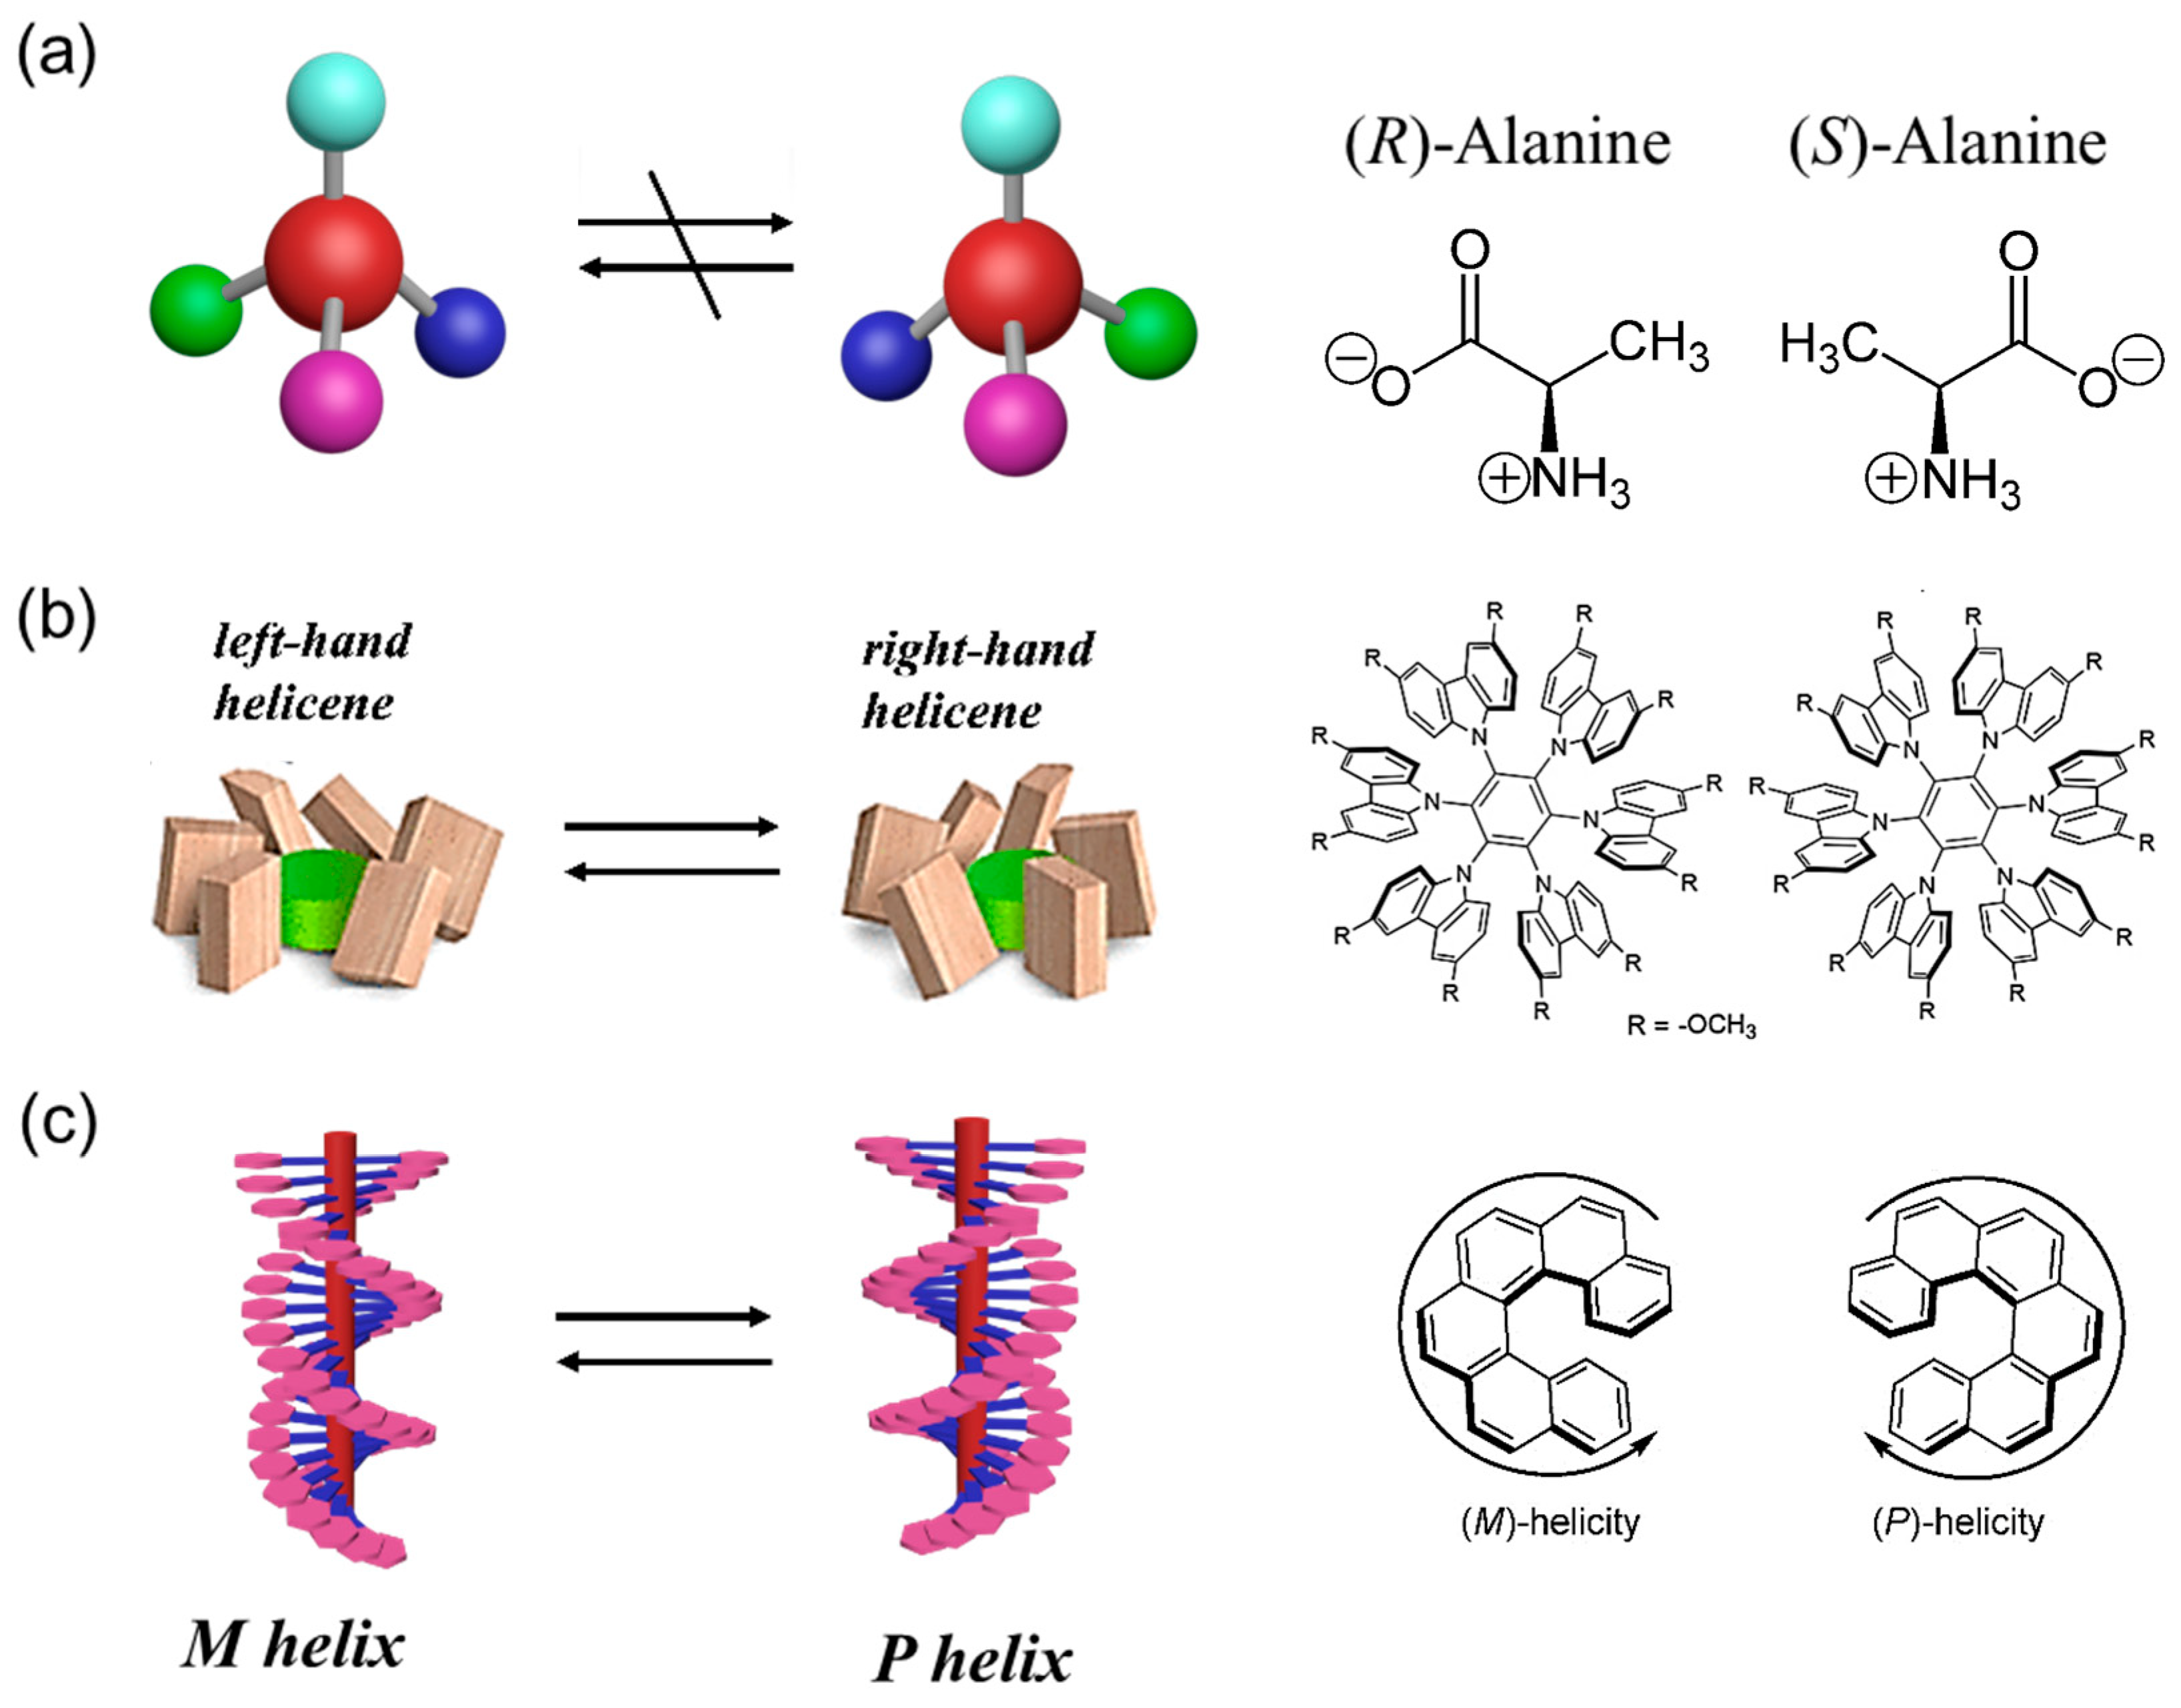 Crystallization and self-assembly of shape-complementary sequence-defined  peptoids - Polymer Chemistry (RSC Publishing) DOI:10.1039/D1PY00426C